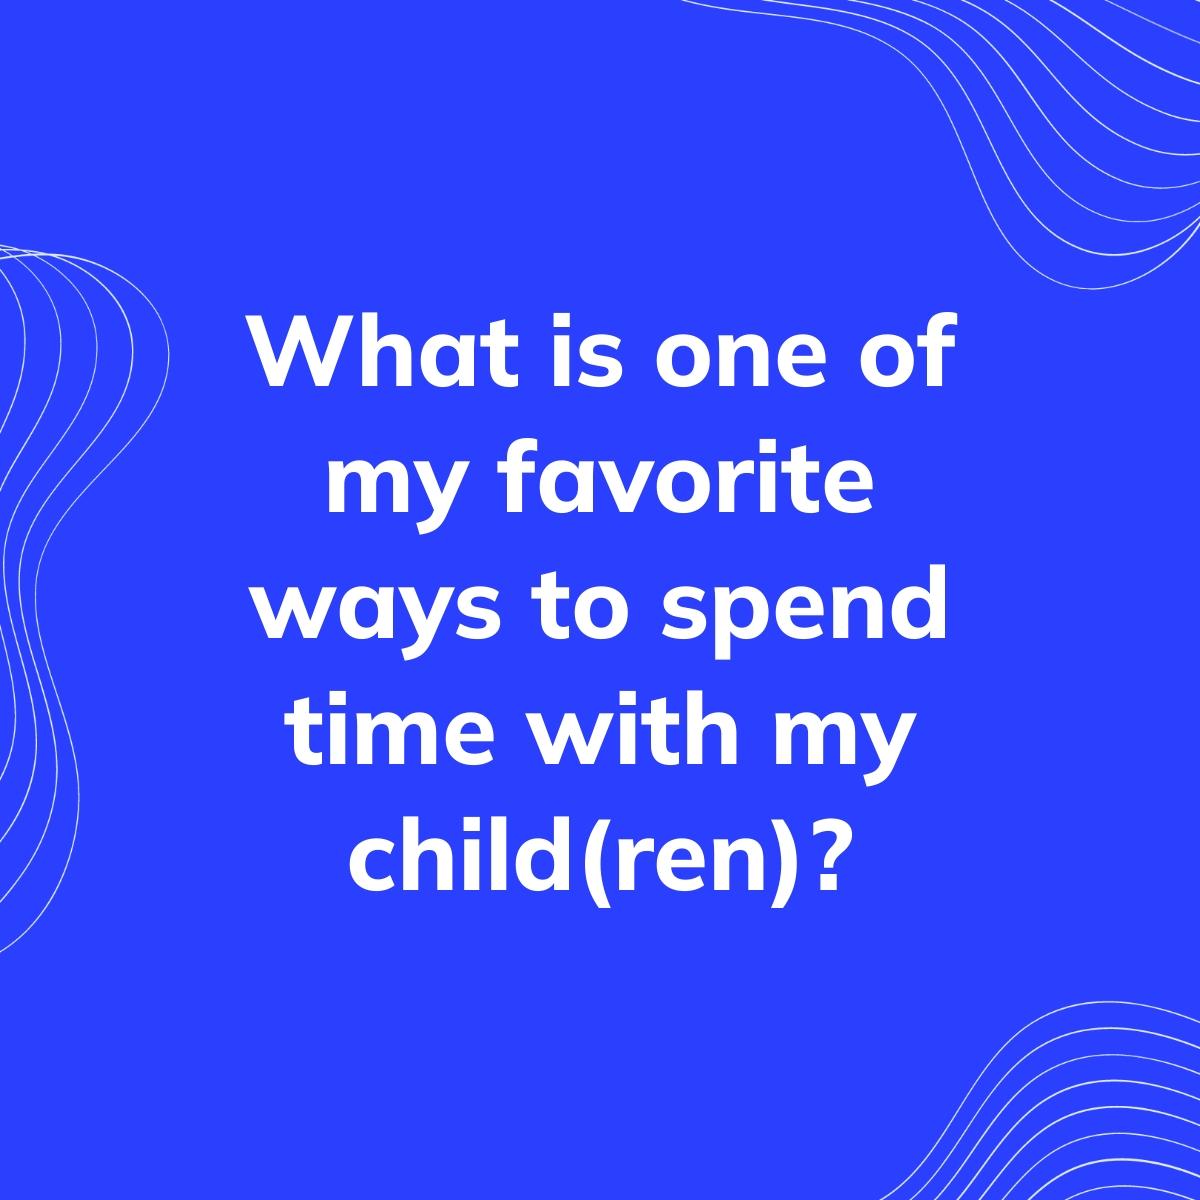 Journal Prompt: What is one of my favorite ways to spend time with my child(ren)?